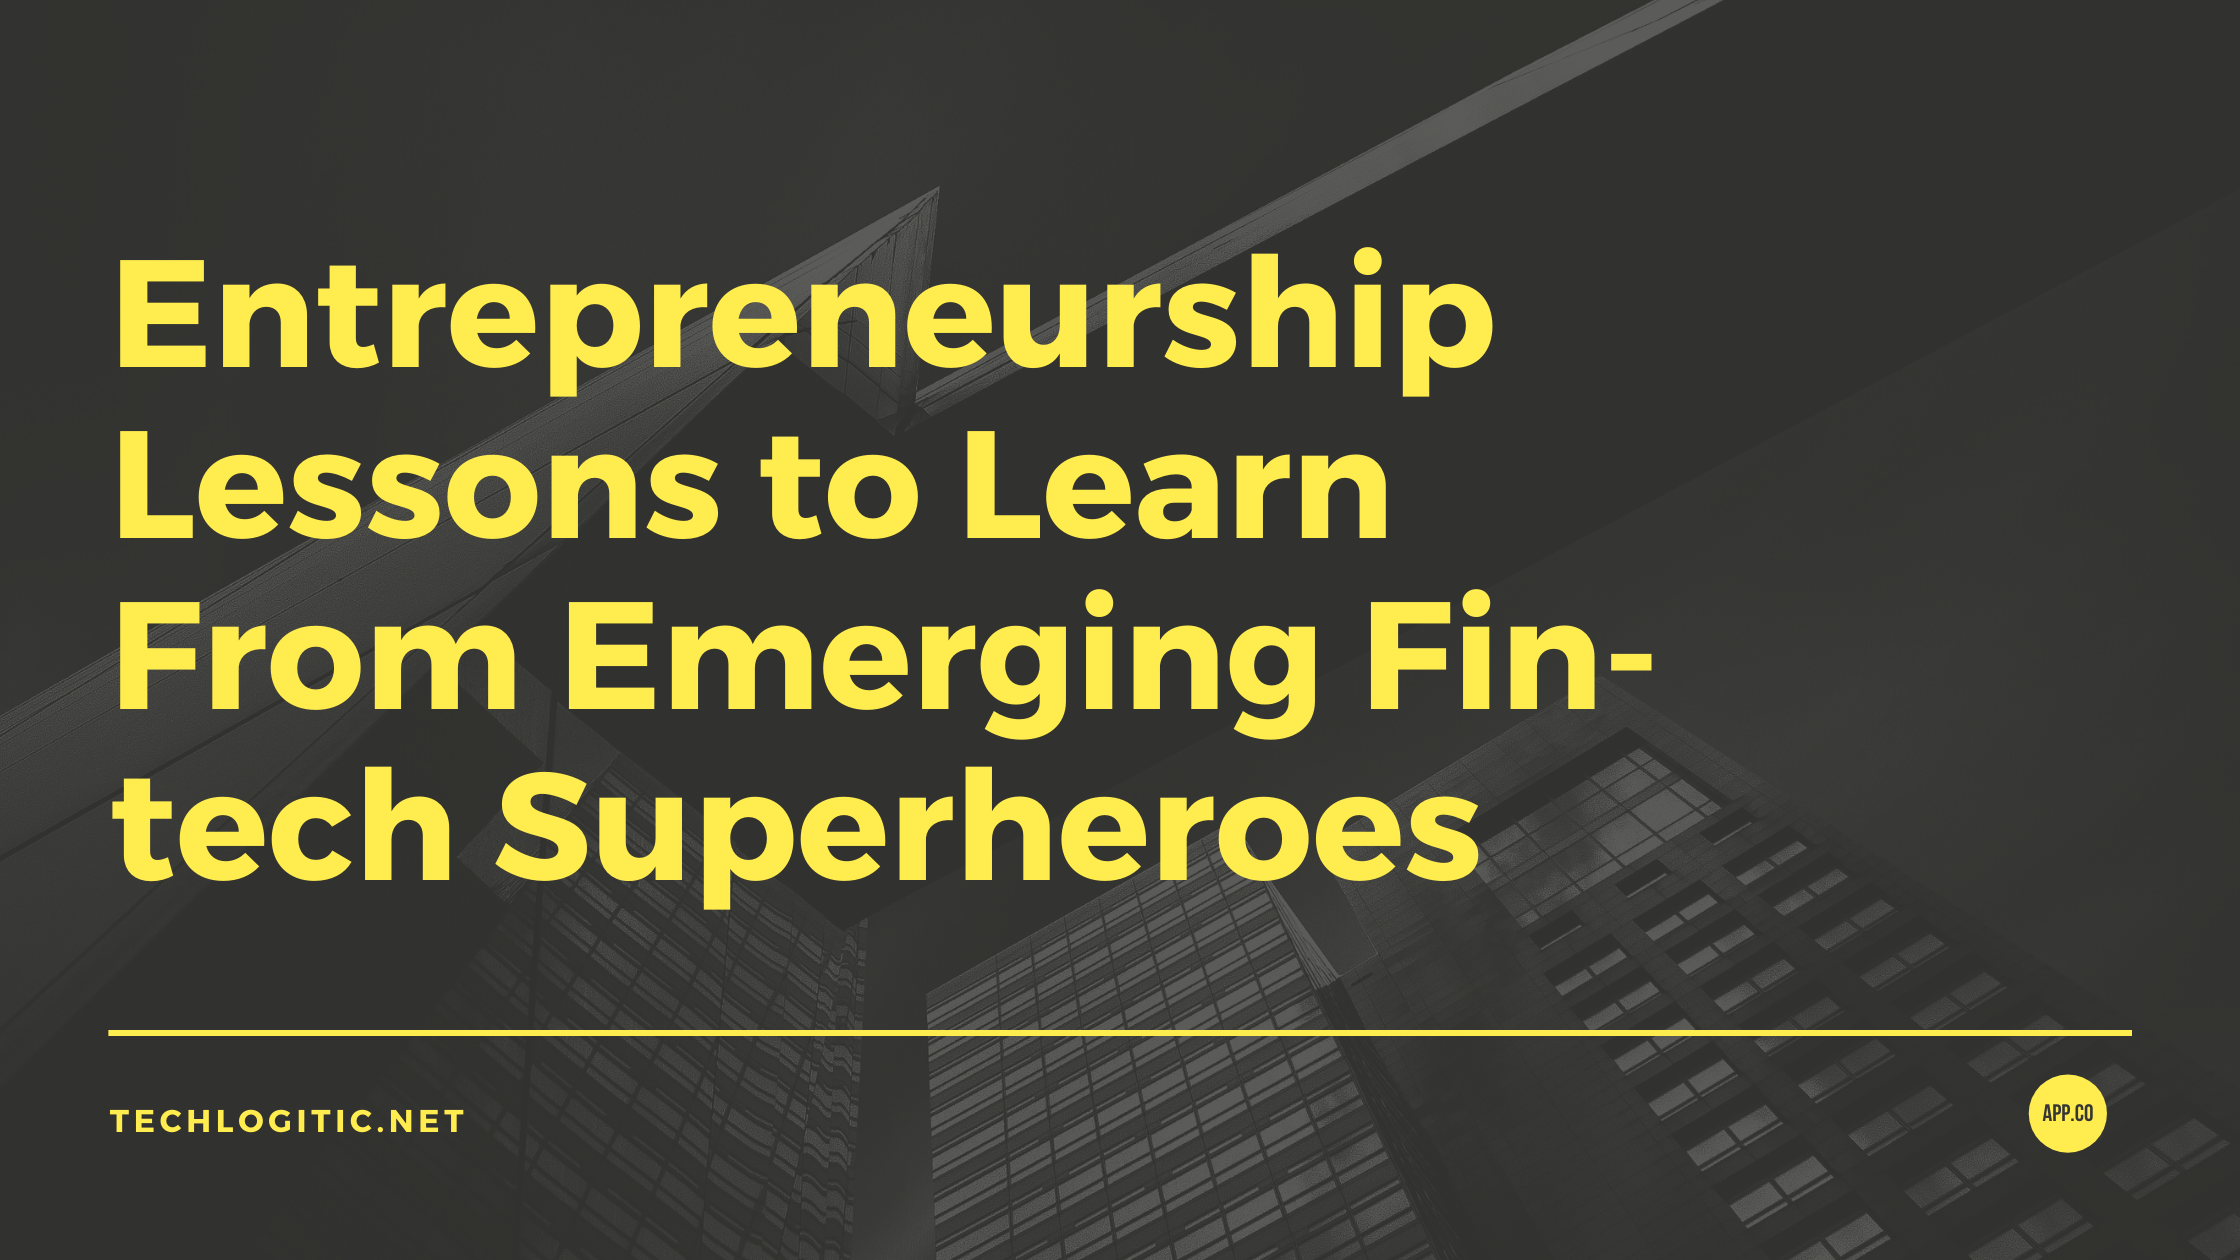 Entrepreneurship lessons to learn from emerging fin-tech superheroes